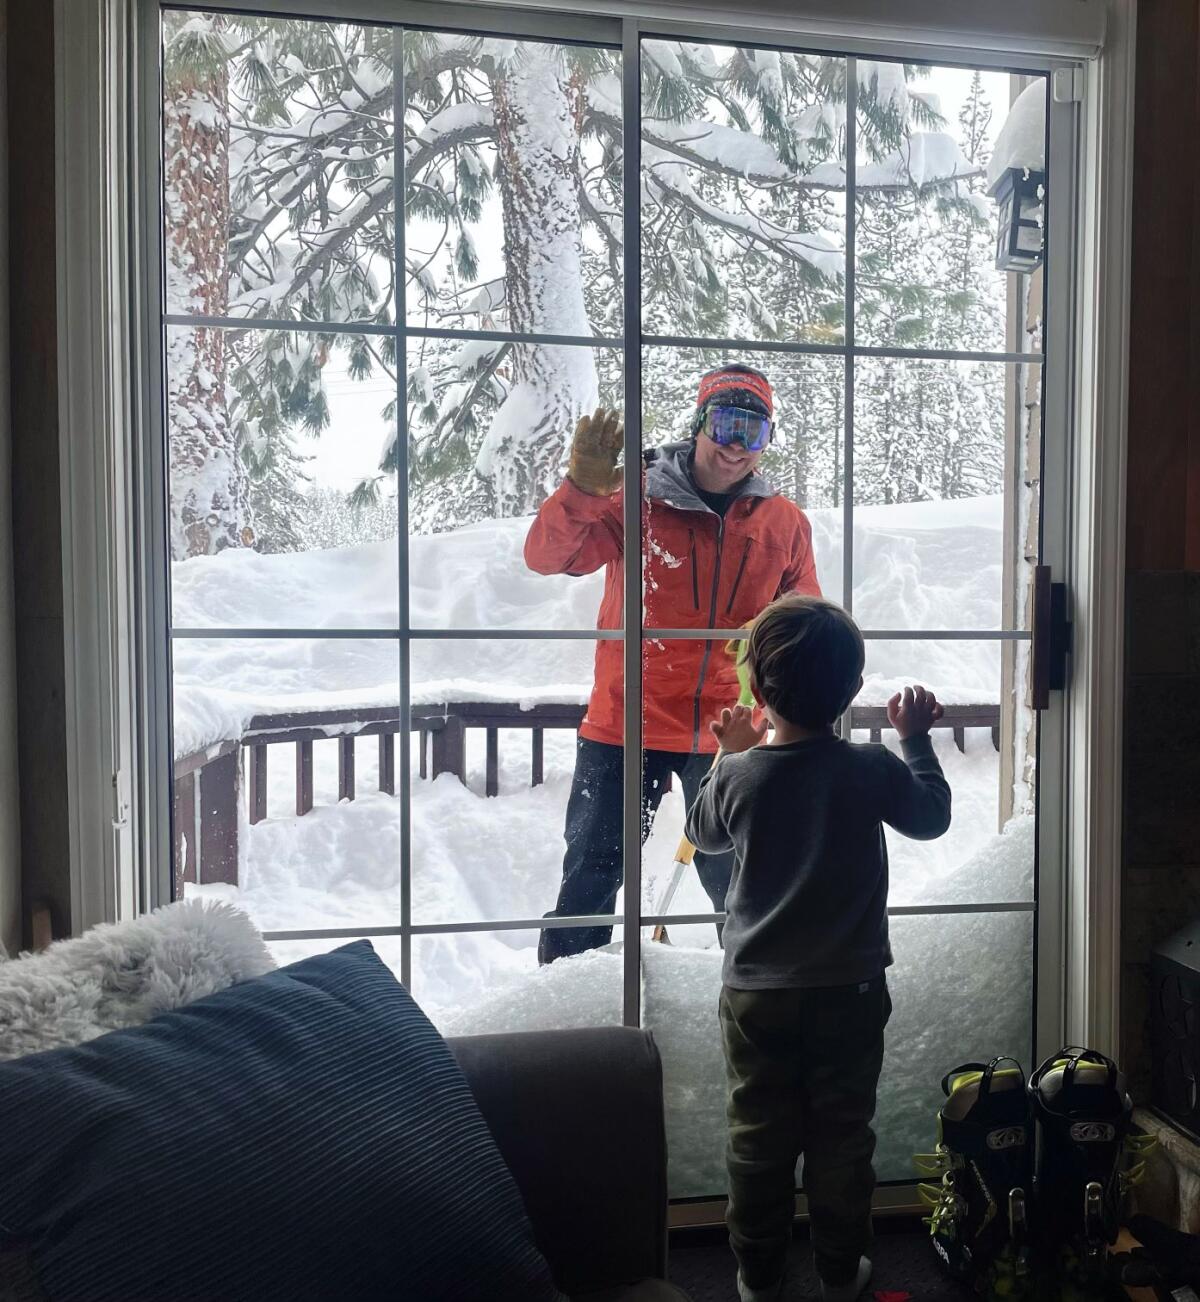 A man in ski gear waves from a snowy deck through a window to a child.